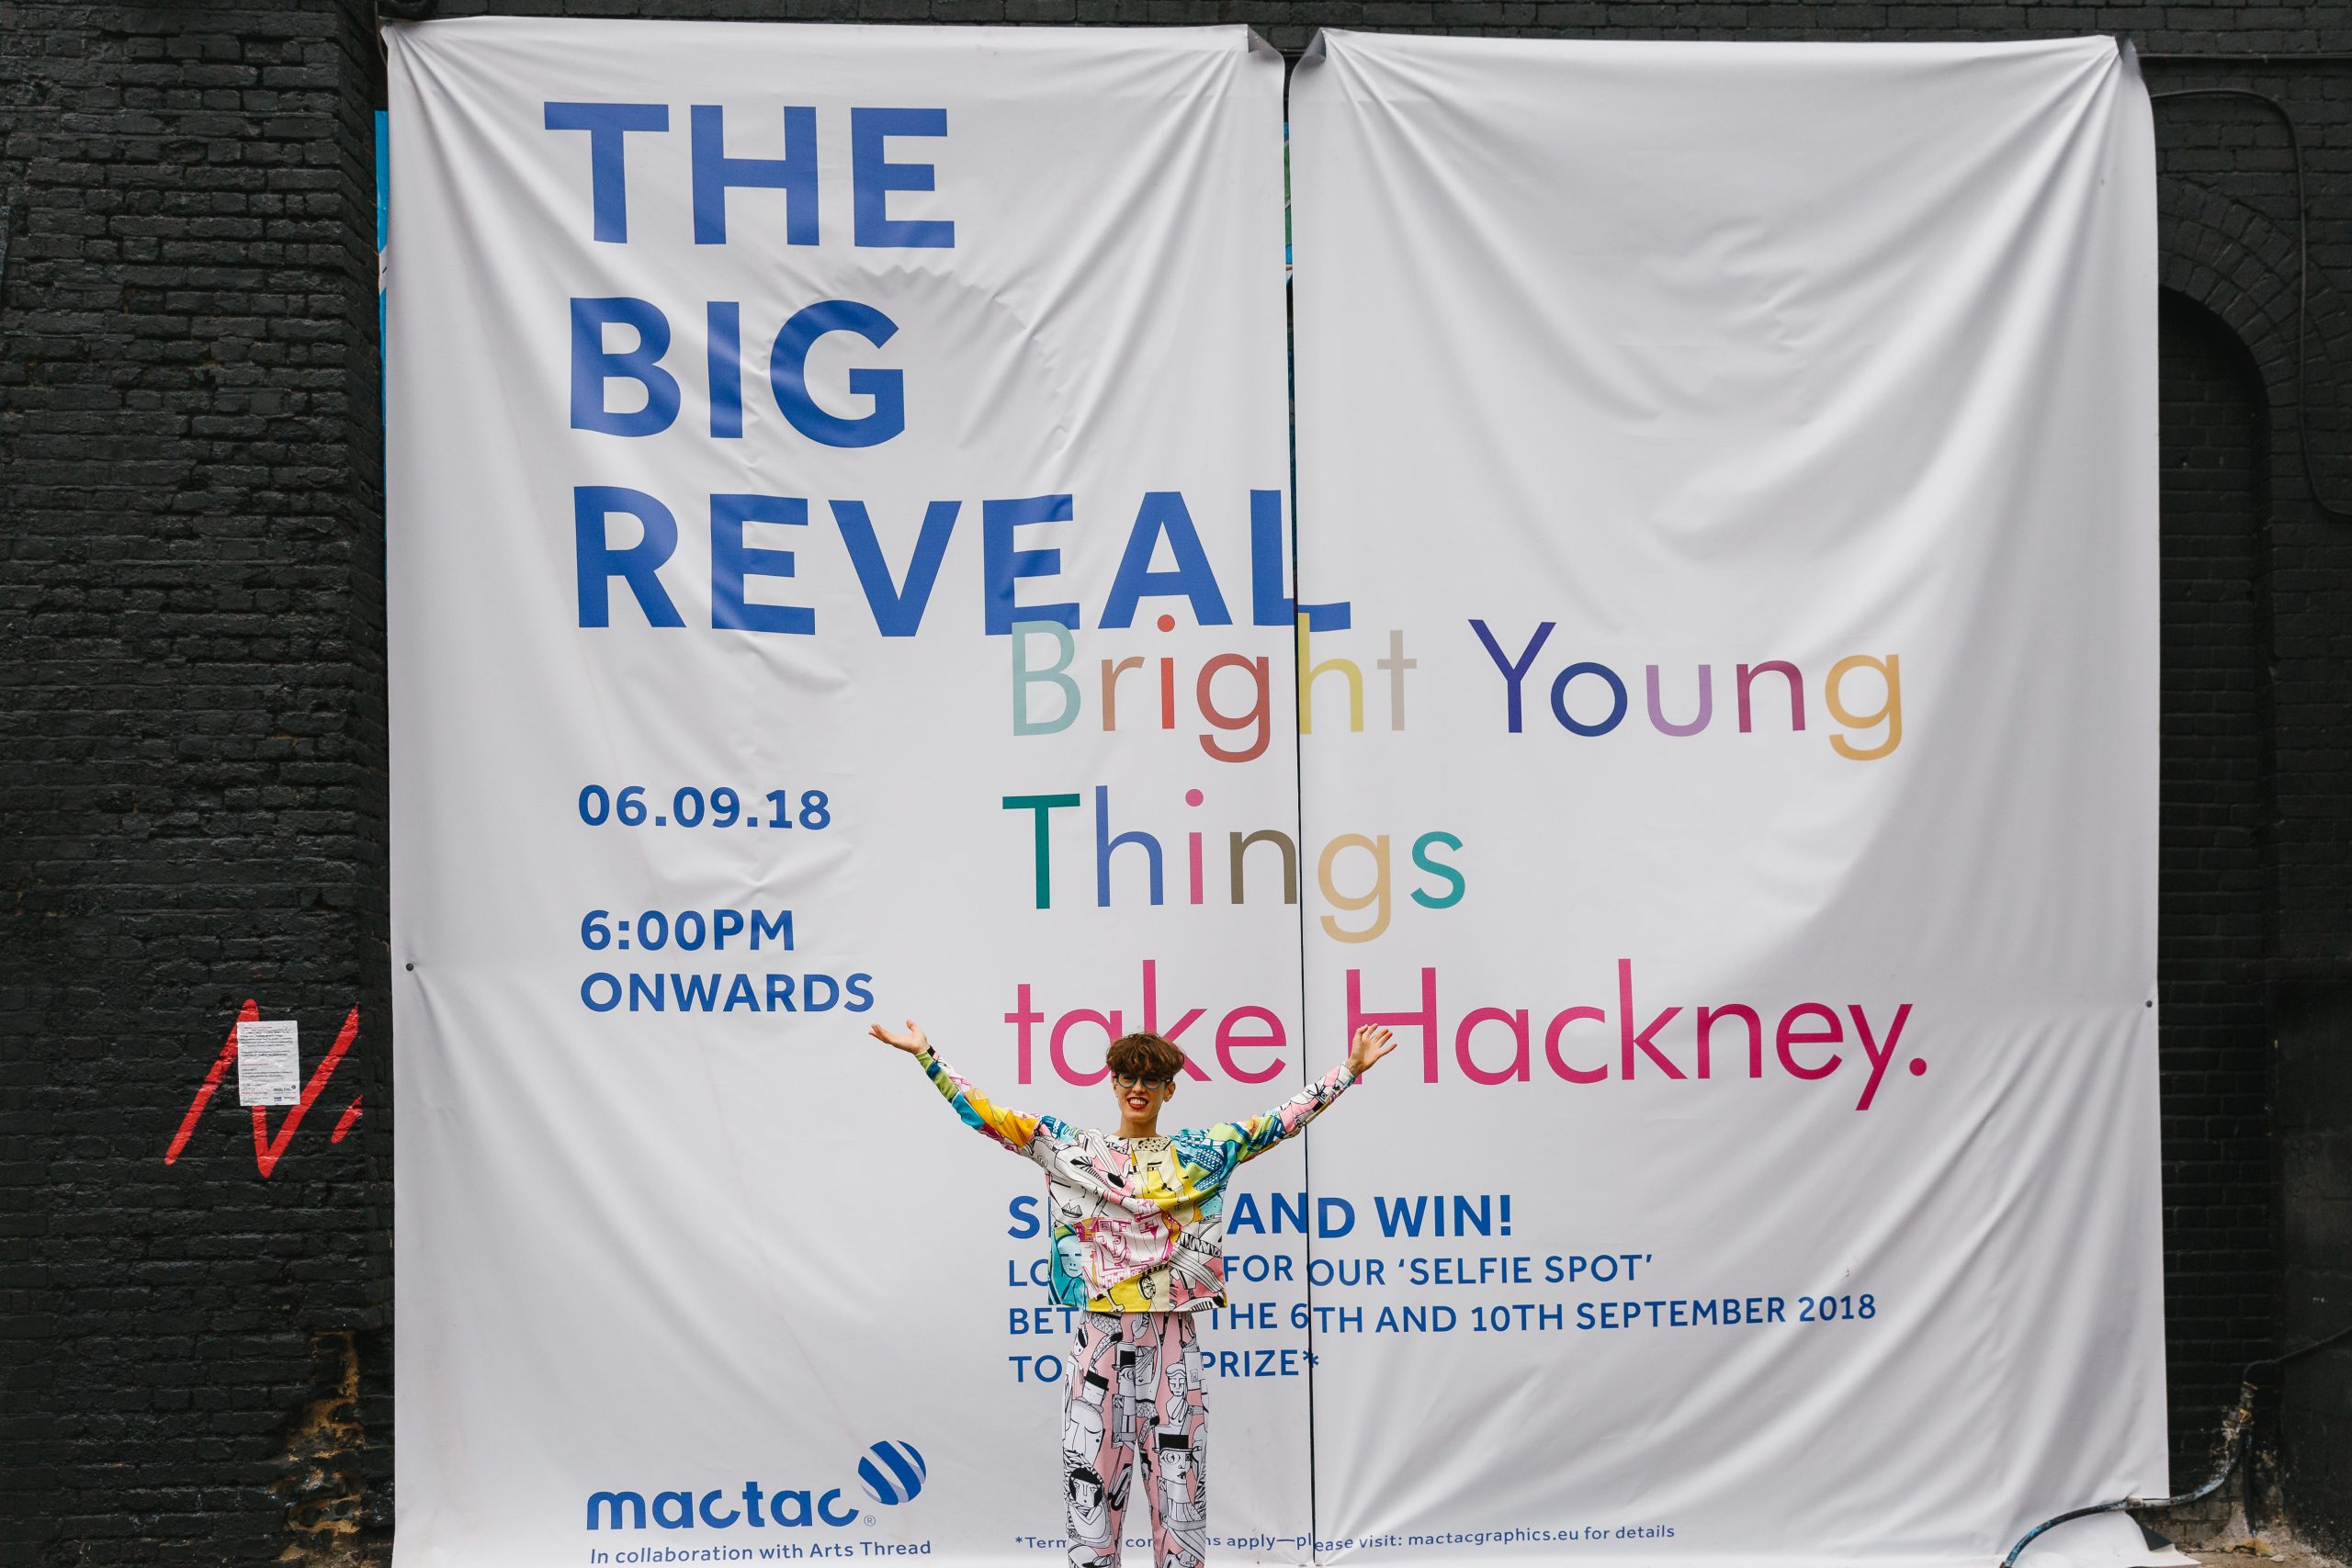 Bright Young Things Take Hackney